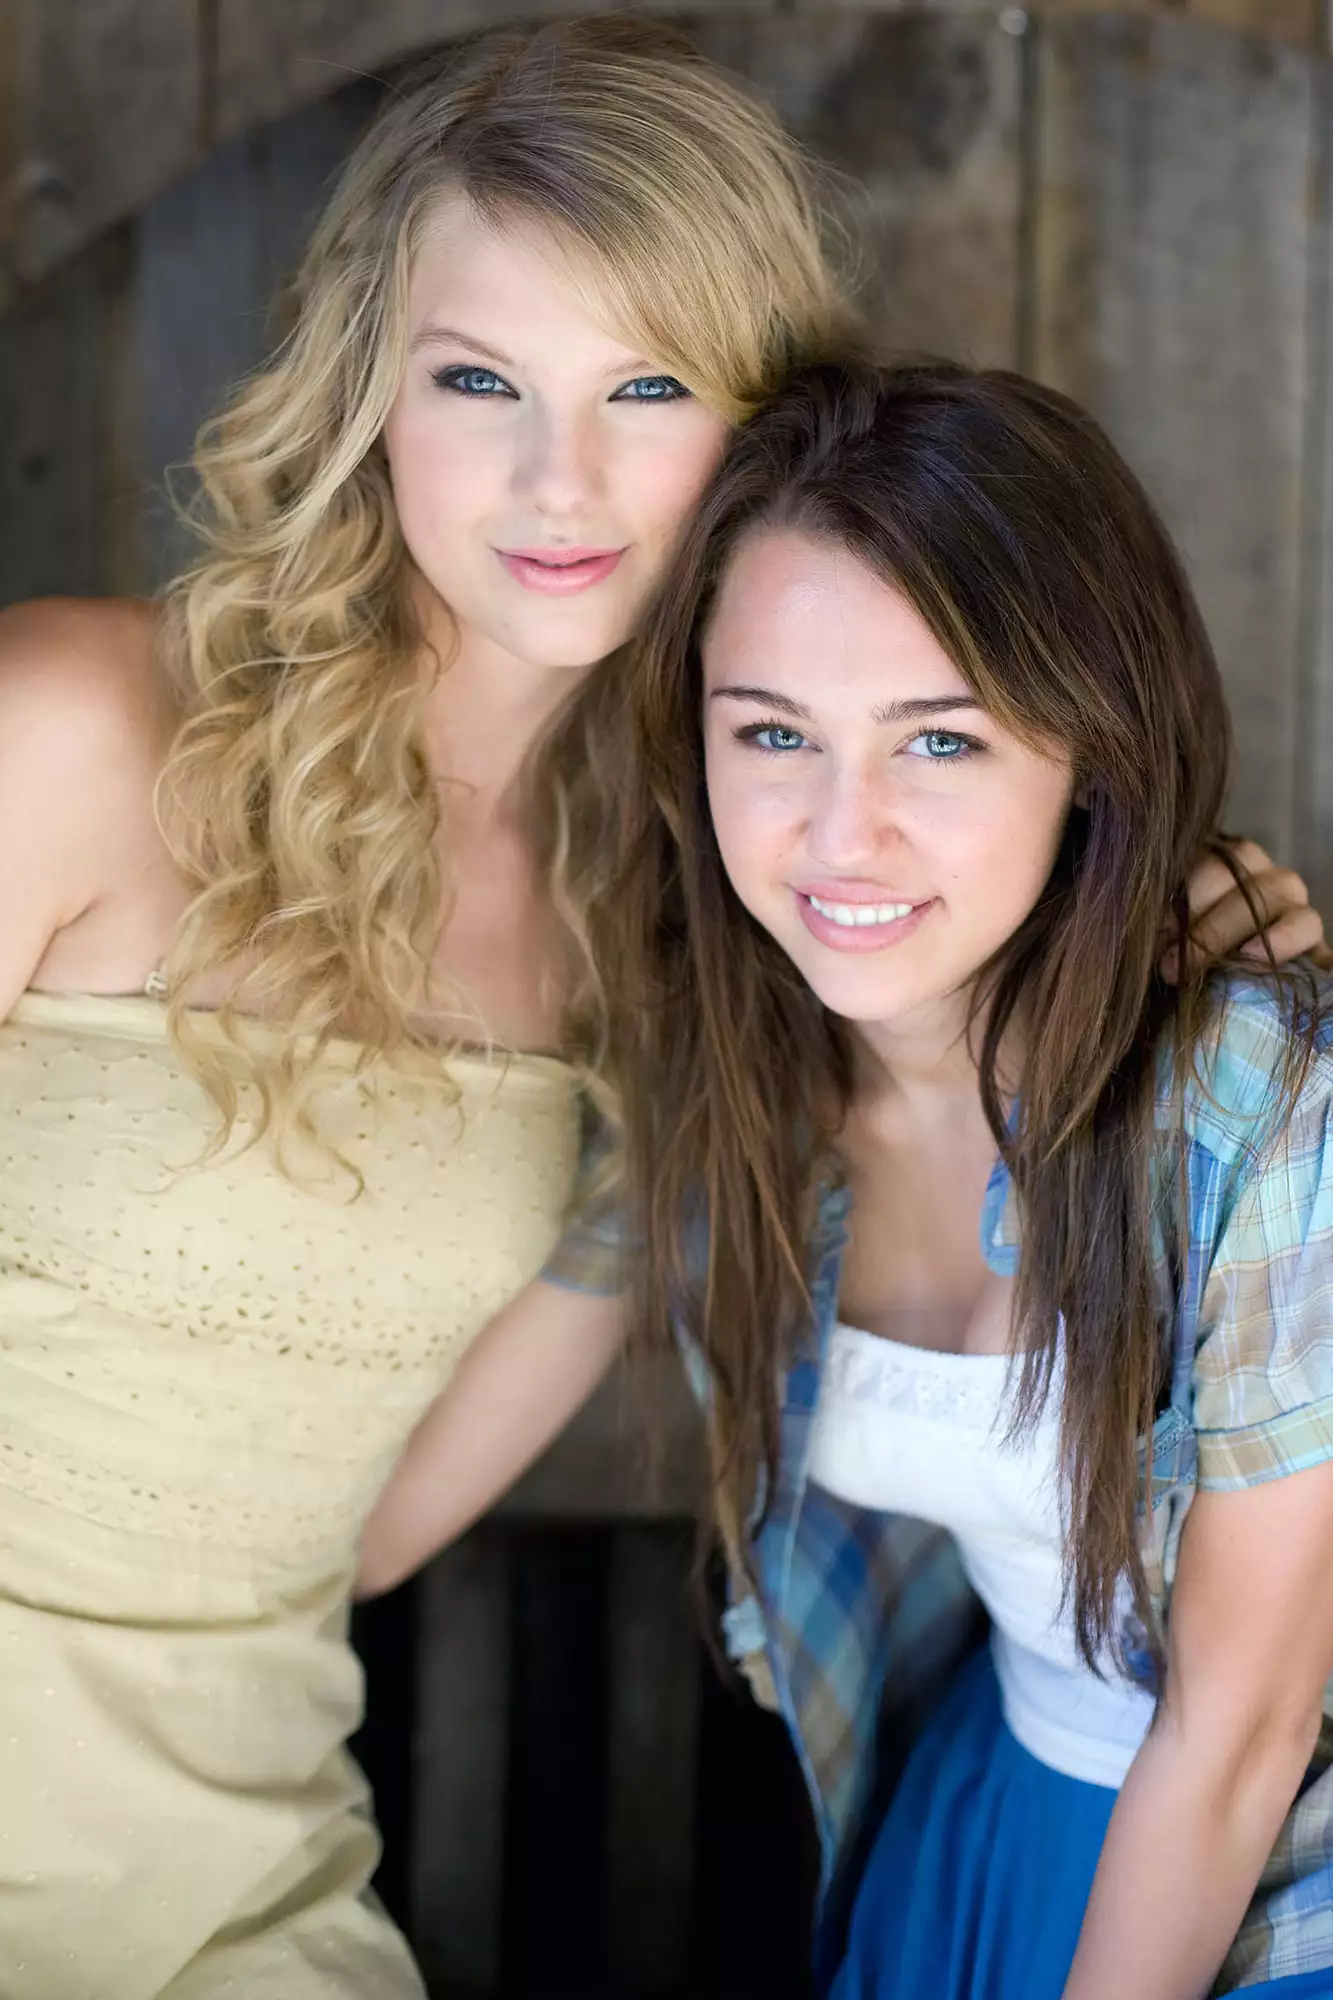 HANNAH MONTANA: THE MOVIE, from left: Taylor Swift, Miley Cyrus, 2009.